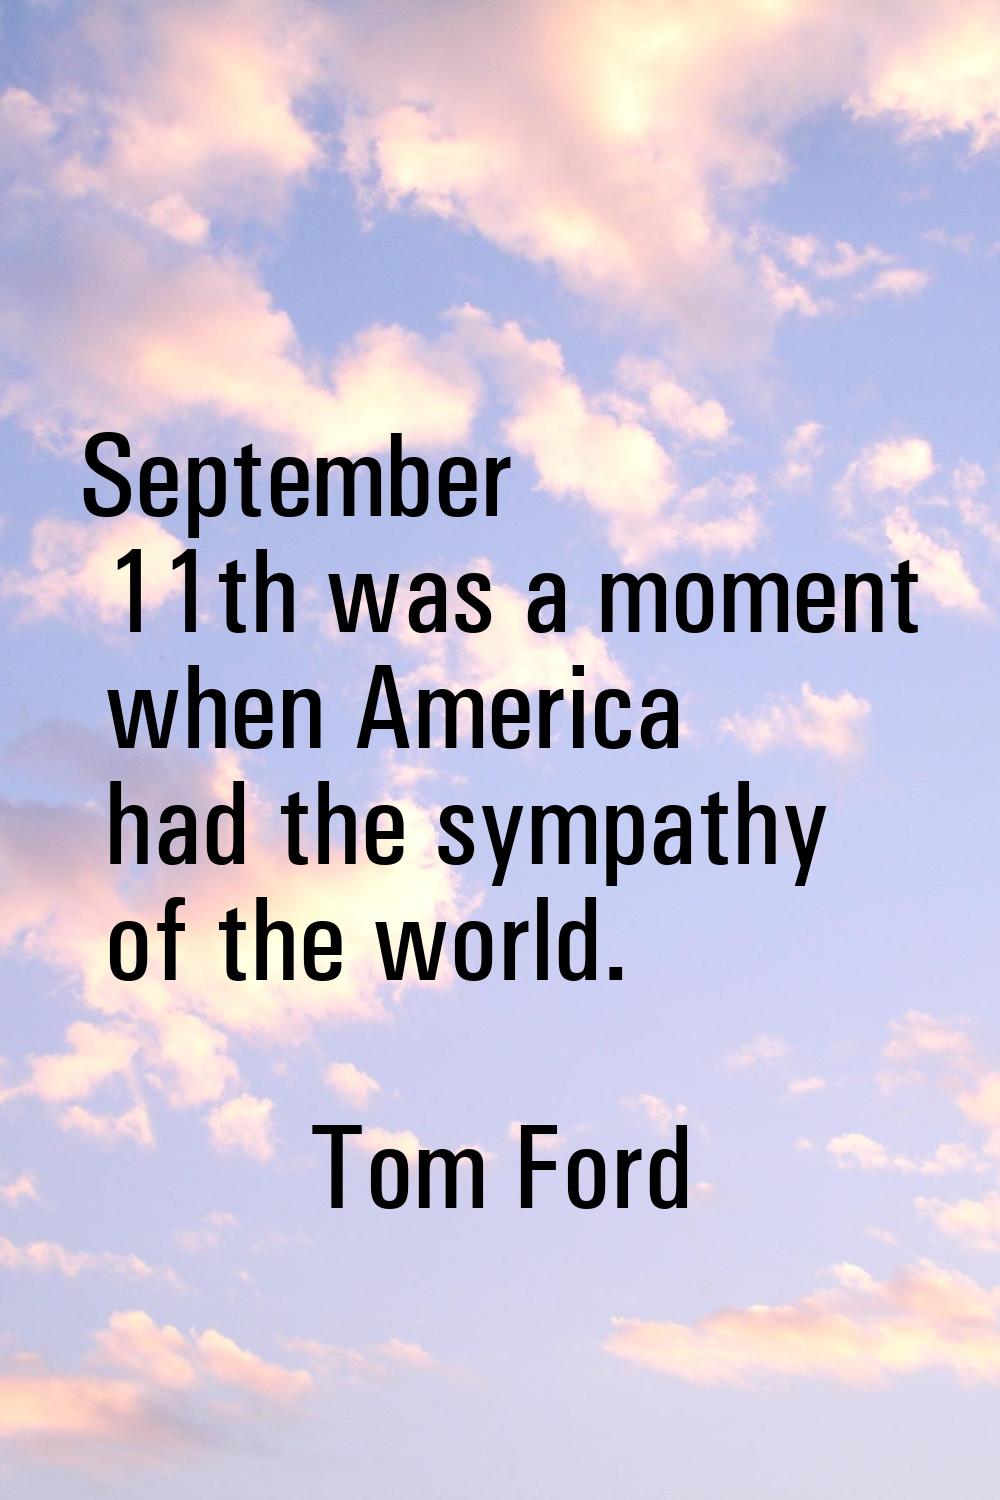 September 11th was a moment when America had the sympathy of the world.